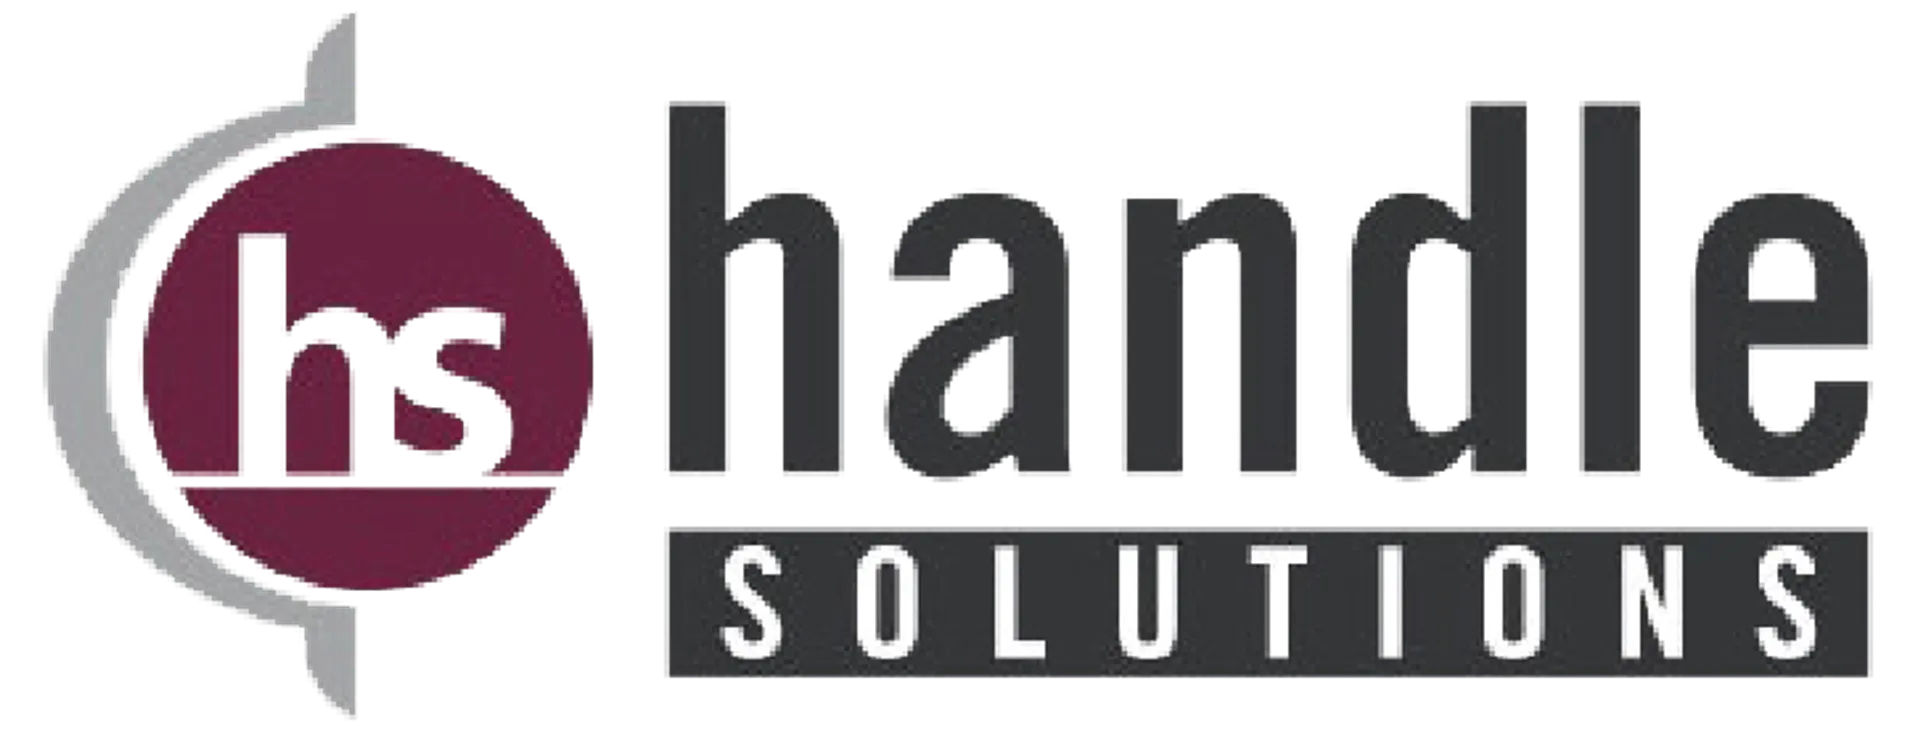 HANDLE SOLUTIONS logo current weekly ad